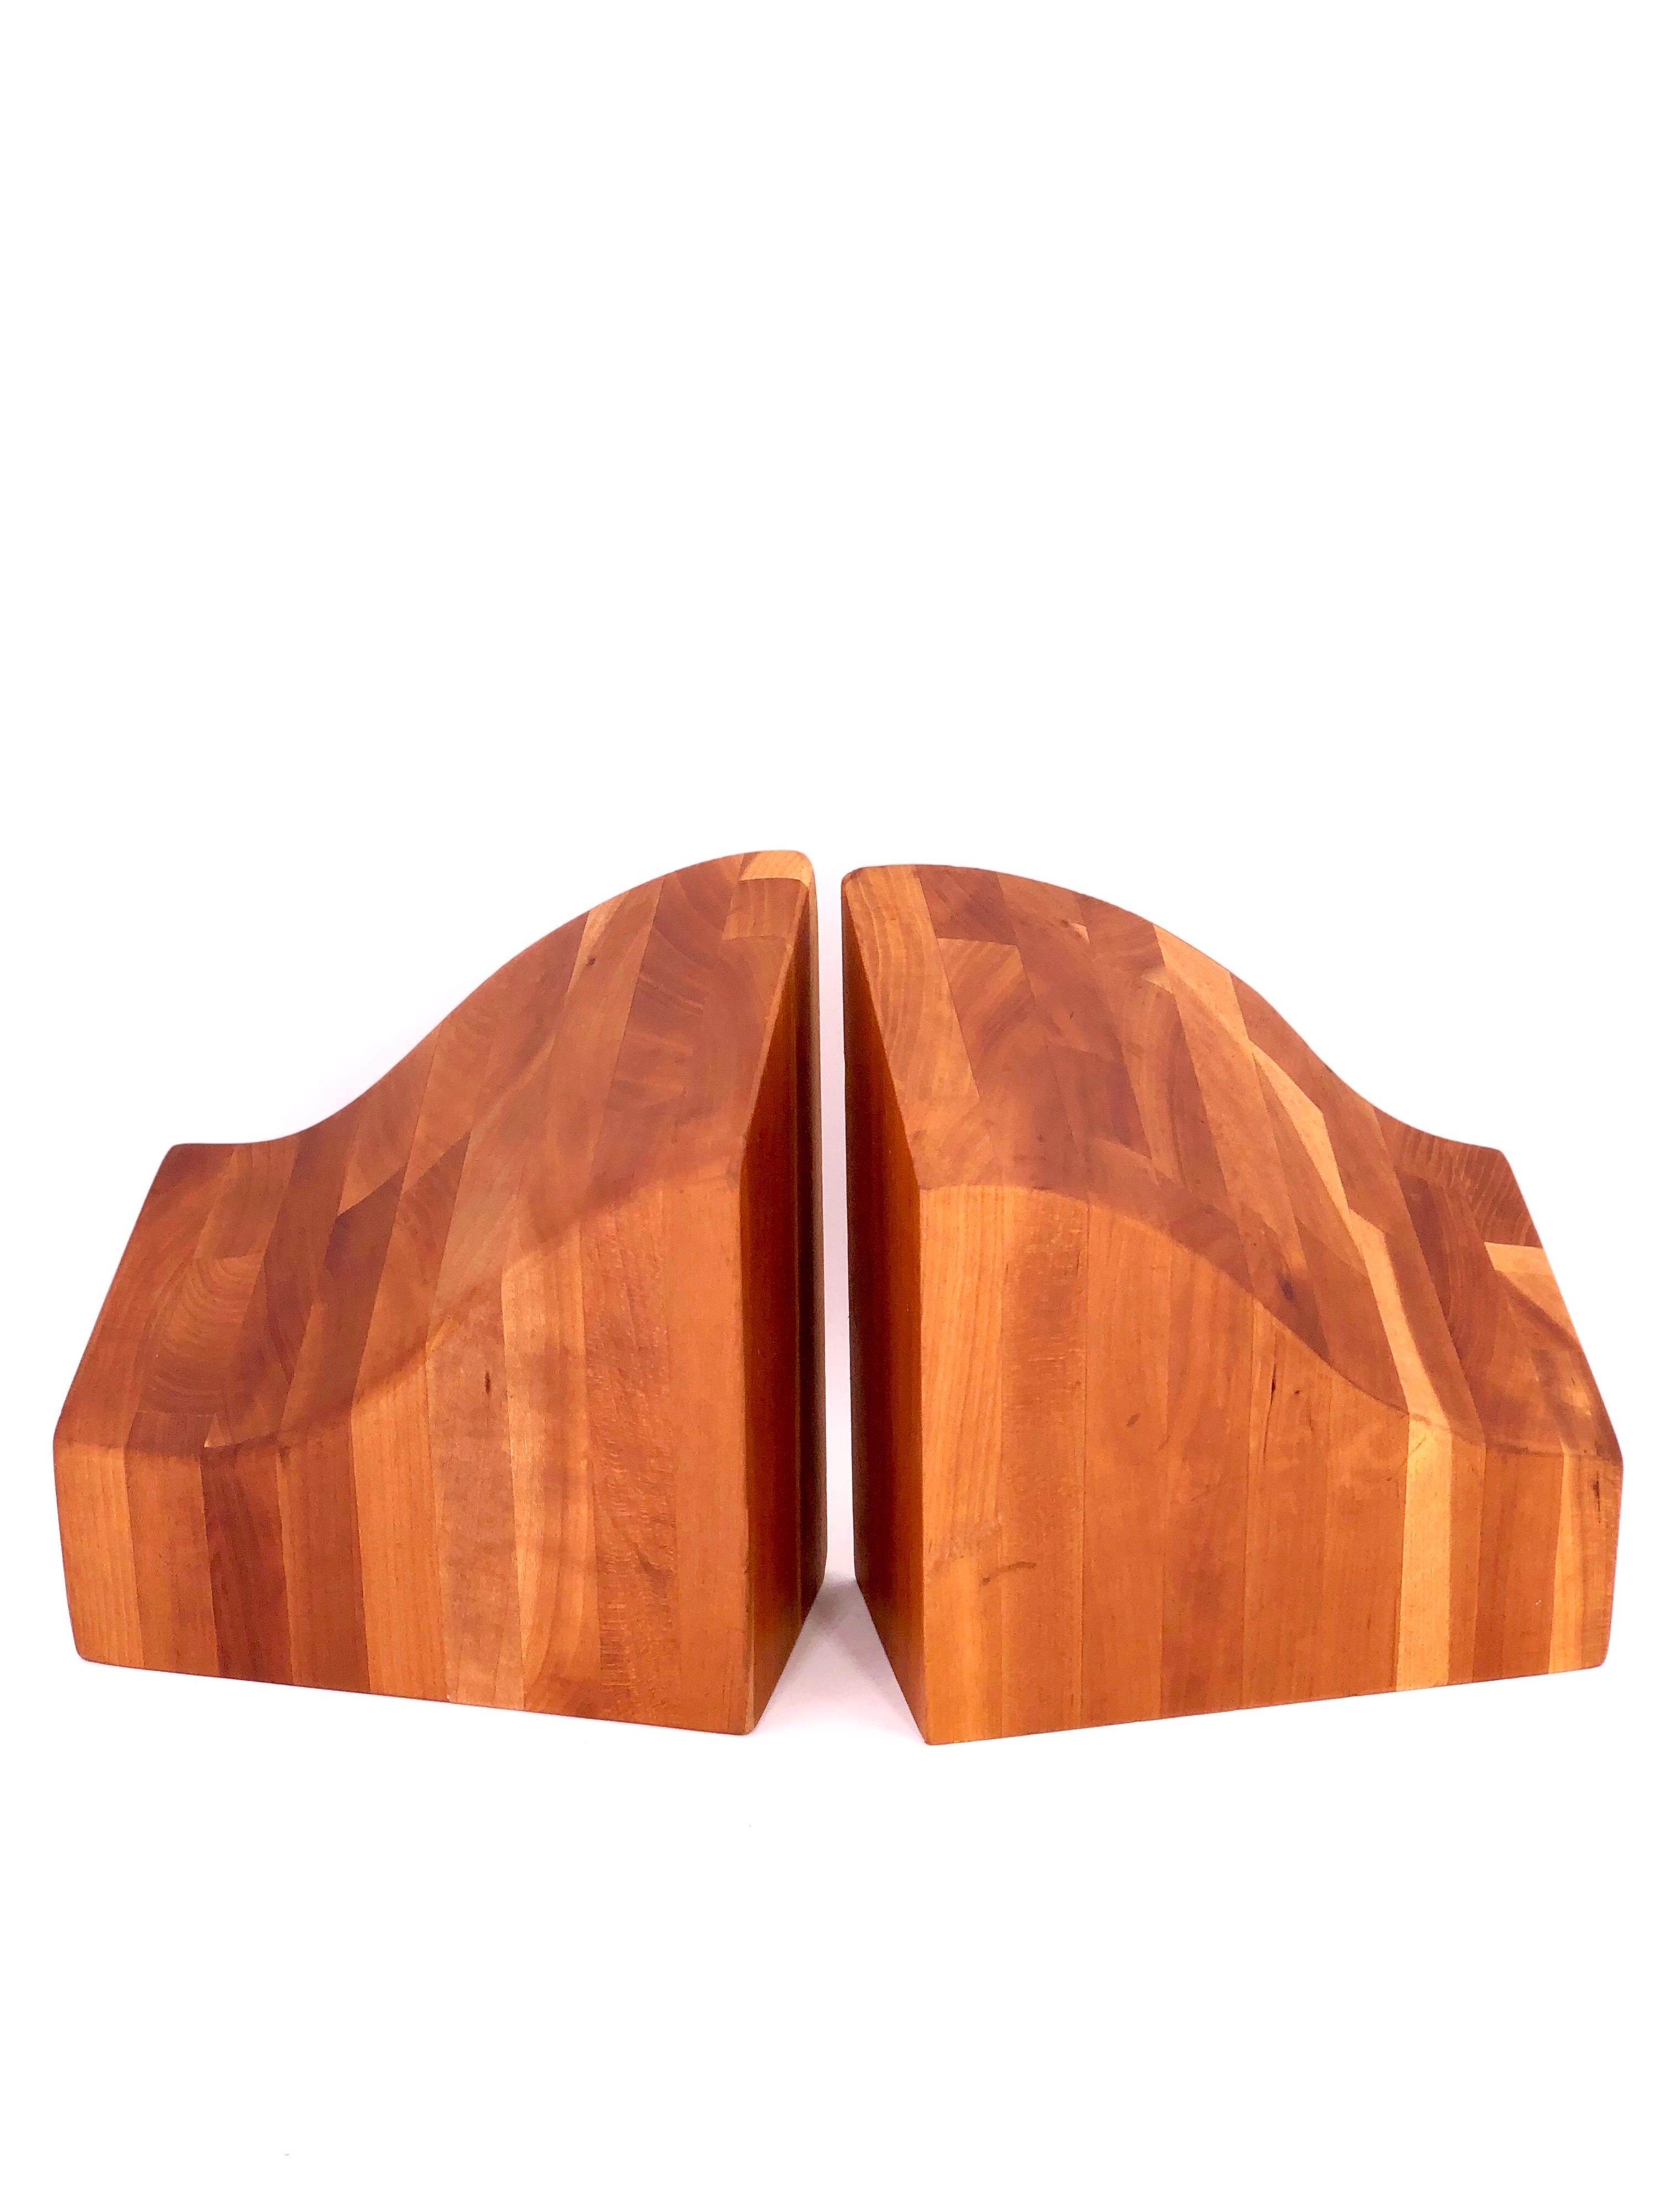 A beautiful and unique pair of organic shapes of solid cherrywood blocks bookends, in the style of Don Shomaker.